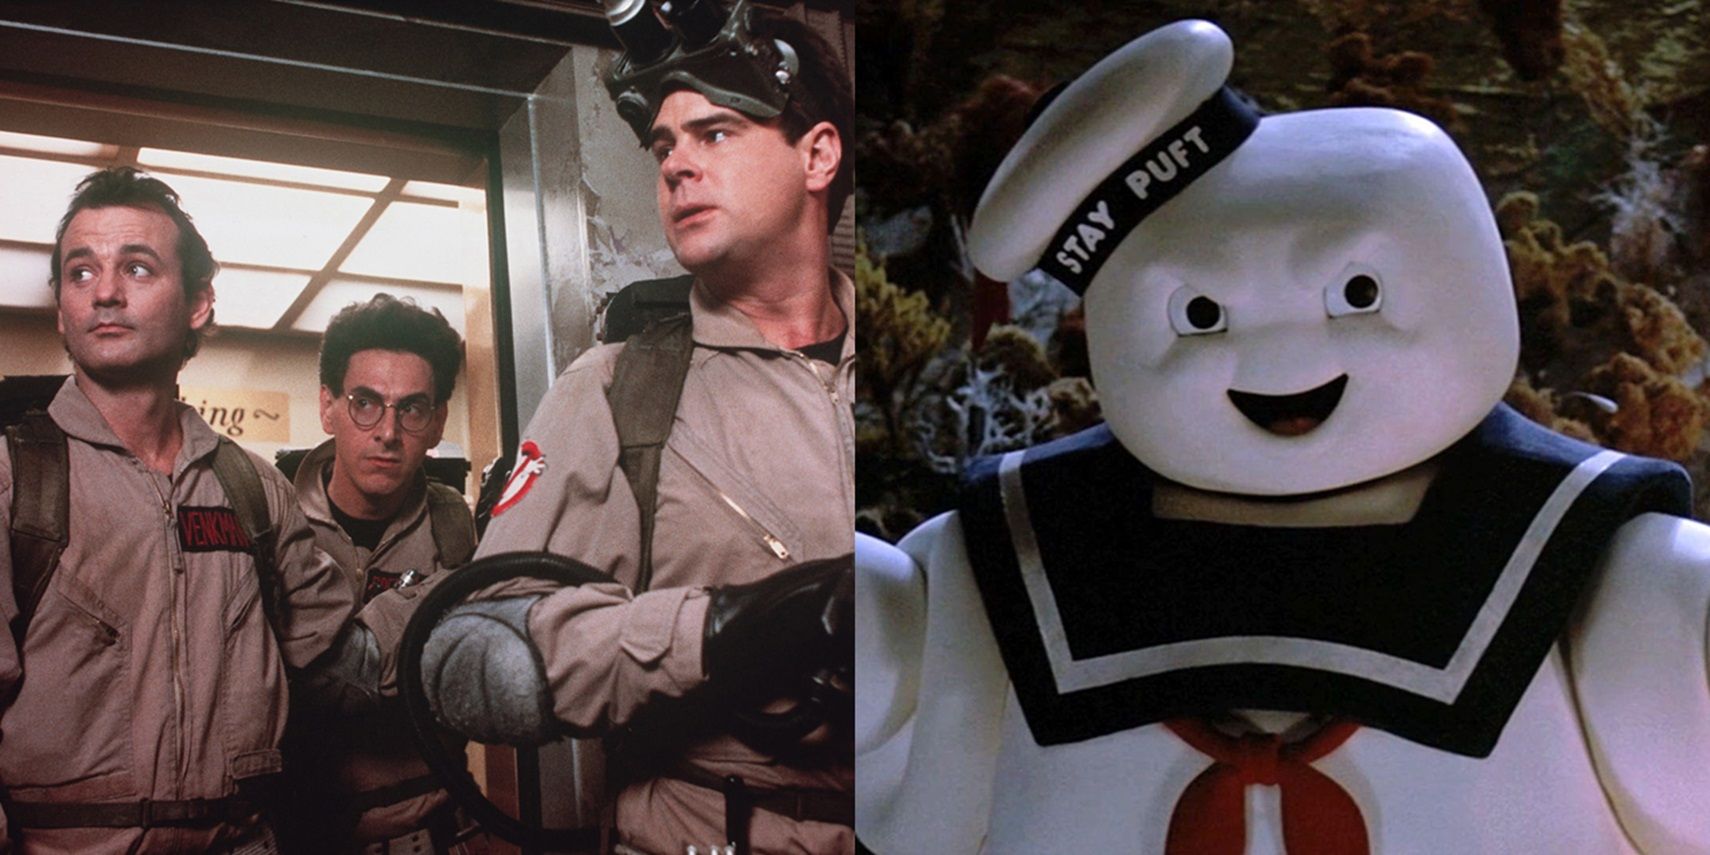 Bill Murray, Harold Ramis, Dan Aykroyd, and the Stay Puft Marshmallow Man in Ghostbusters